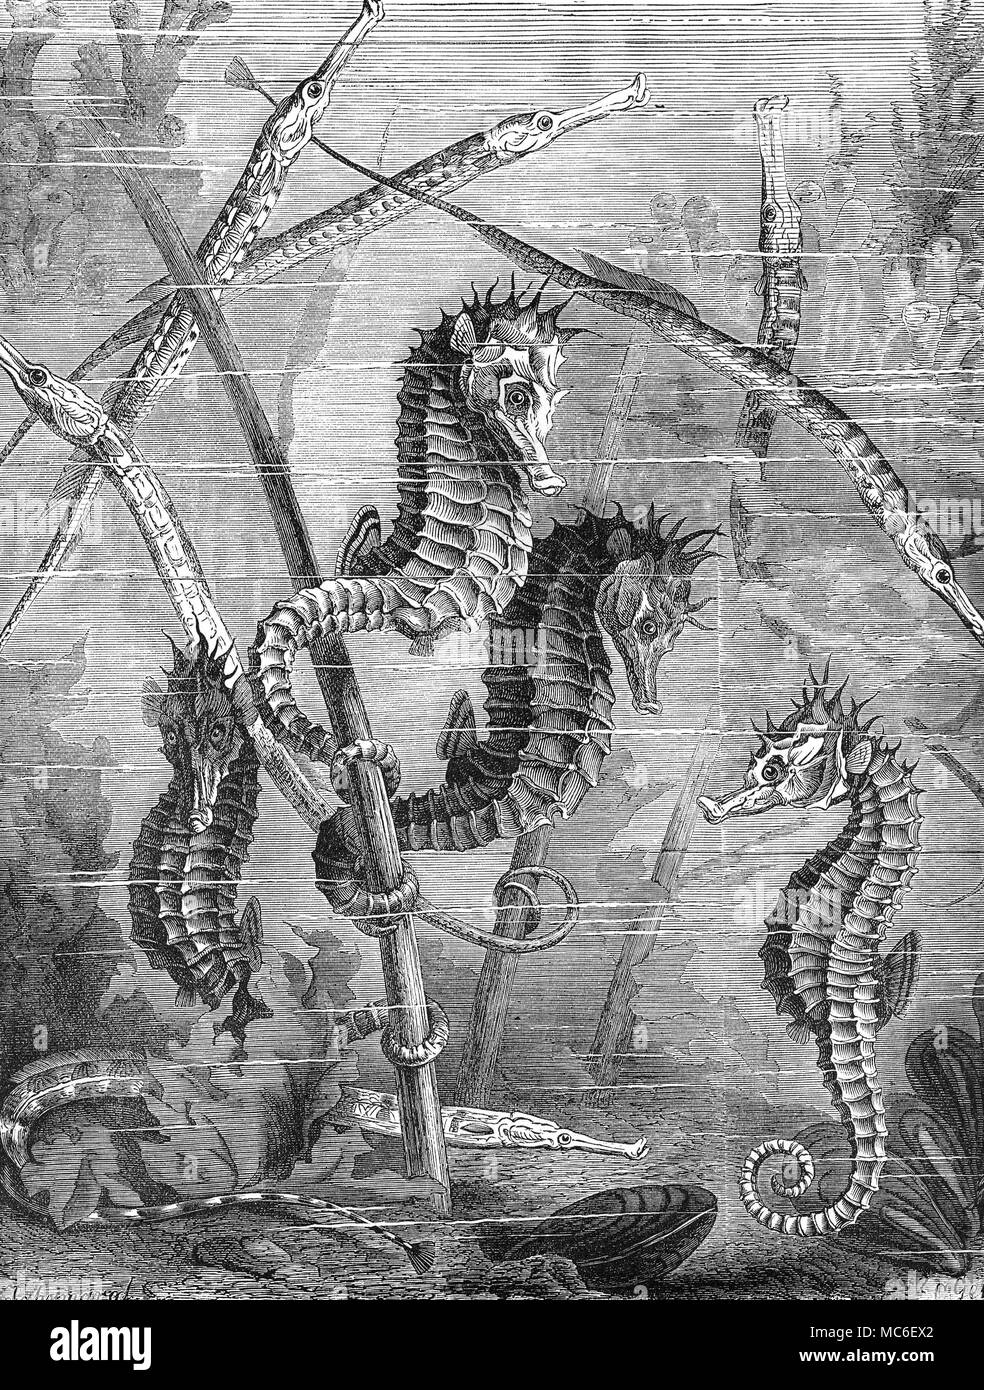 MONSTERS 'Monsters of the Deep' - seahorses and pipe fish. Wood engraving of circa 1880. Stock Photo